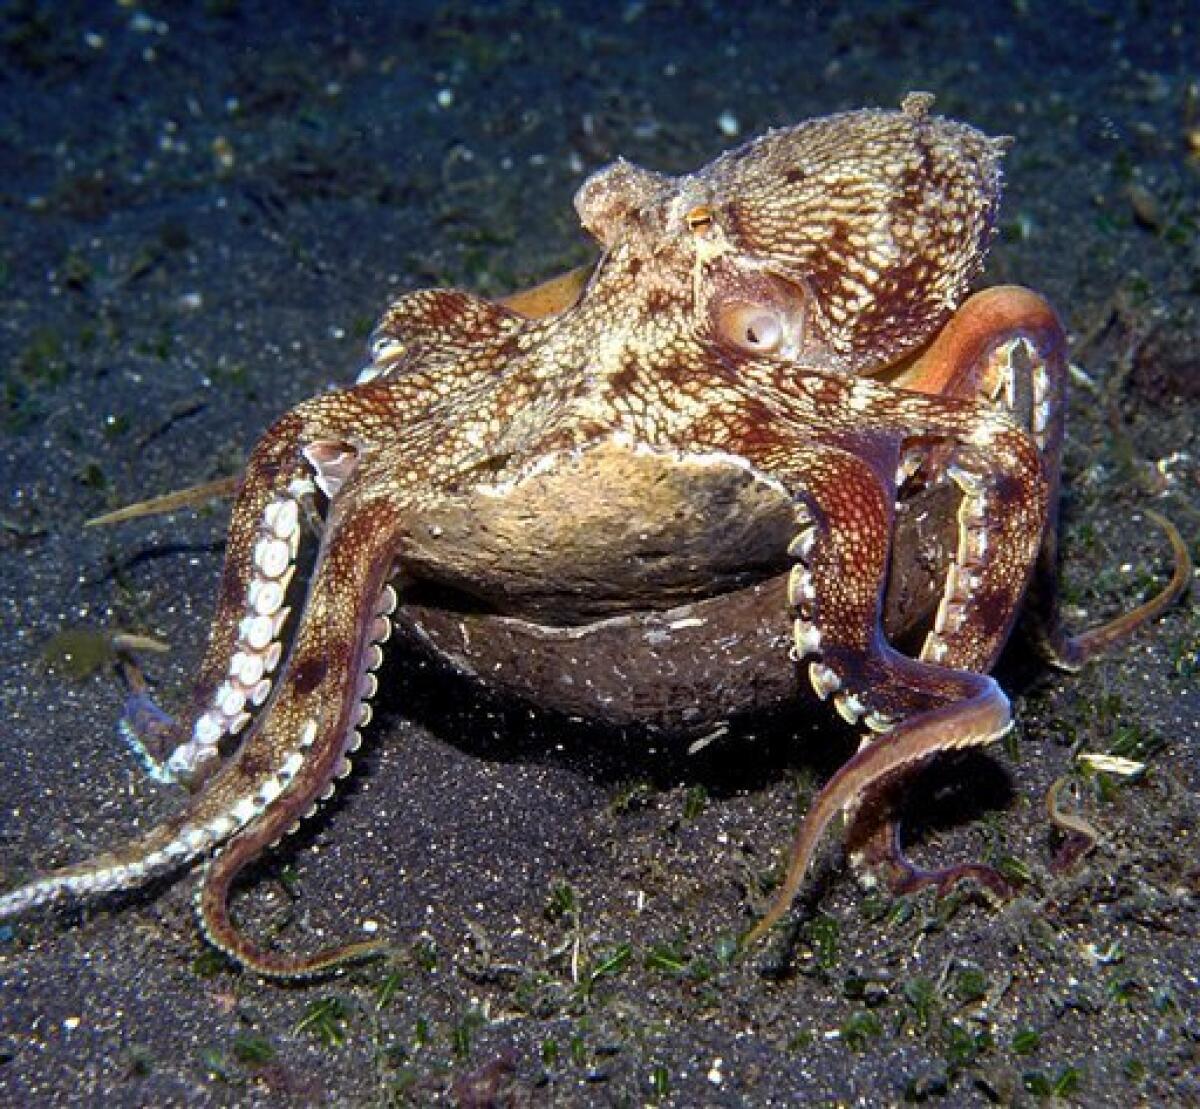 In this Dec. 10, 2009 photo taken near Indonesia and released by Museum Victoria, a veined octopus, Amphioctopus marginatus crawls along the ocean floor holding one half of a coconut shell. Australian scientists have filmed the octopus collecting coconut shells for shelter, unusually sophisticated behavior that the researchers believe is the first evidence of tool use in an invertebrate animal. (AP Photo/Museum Victoria, Roger Steene)